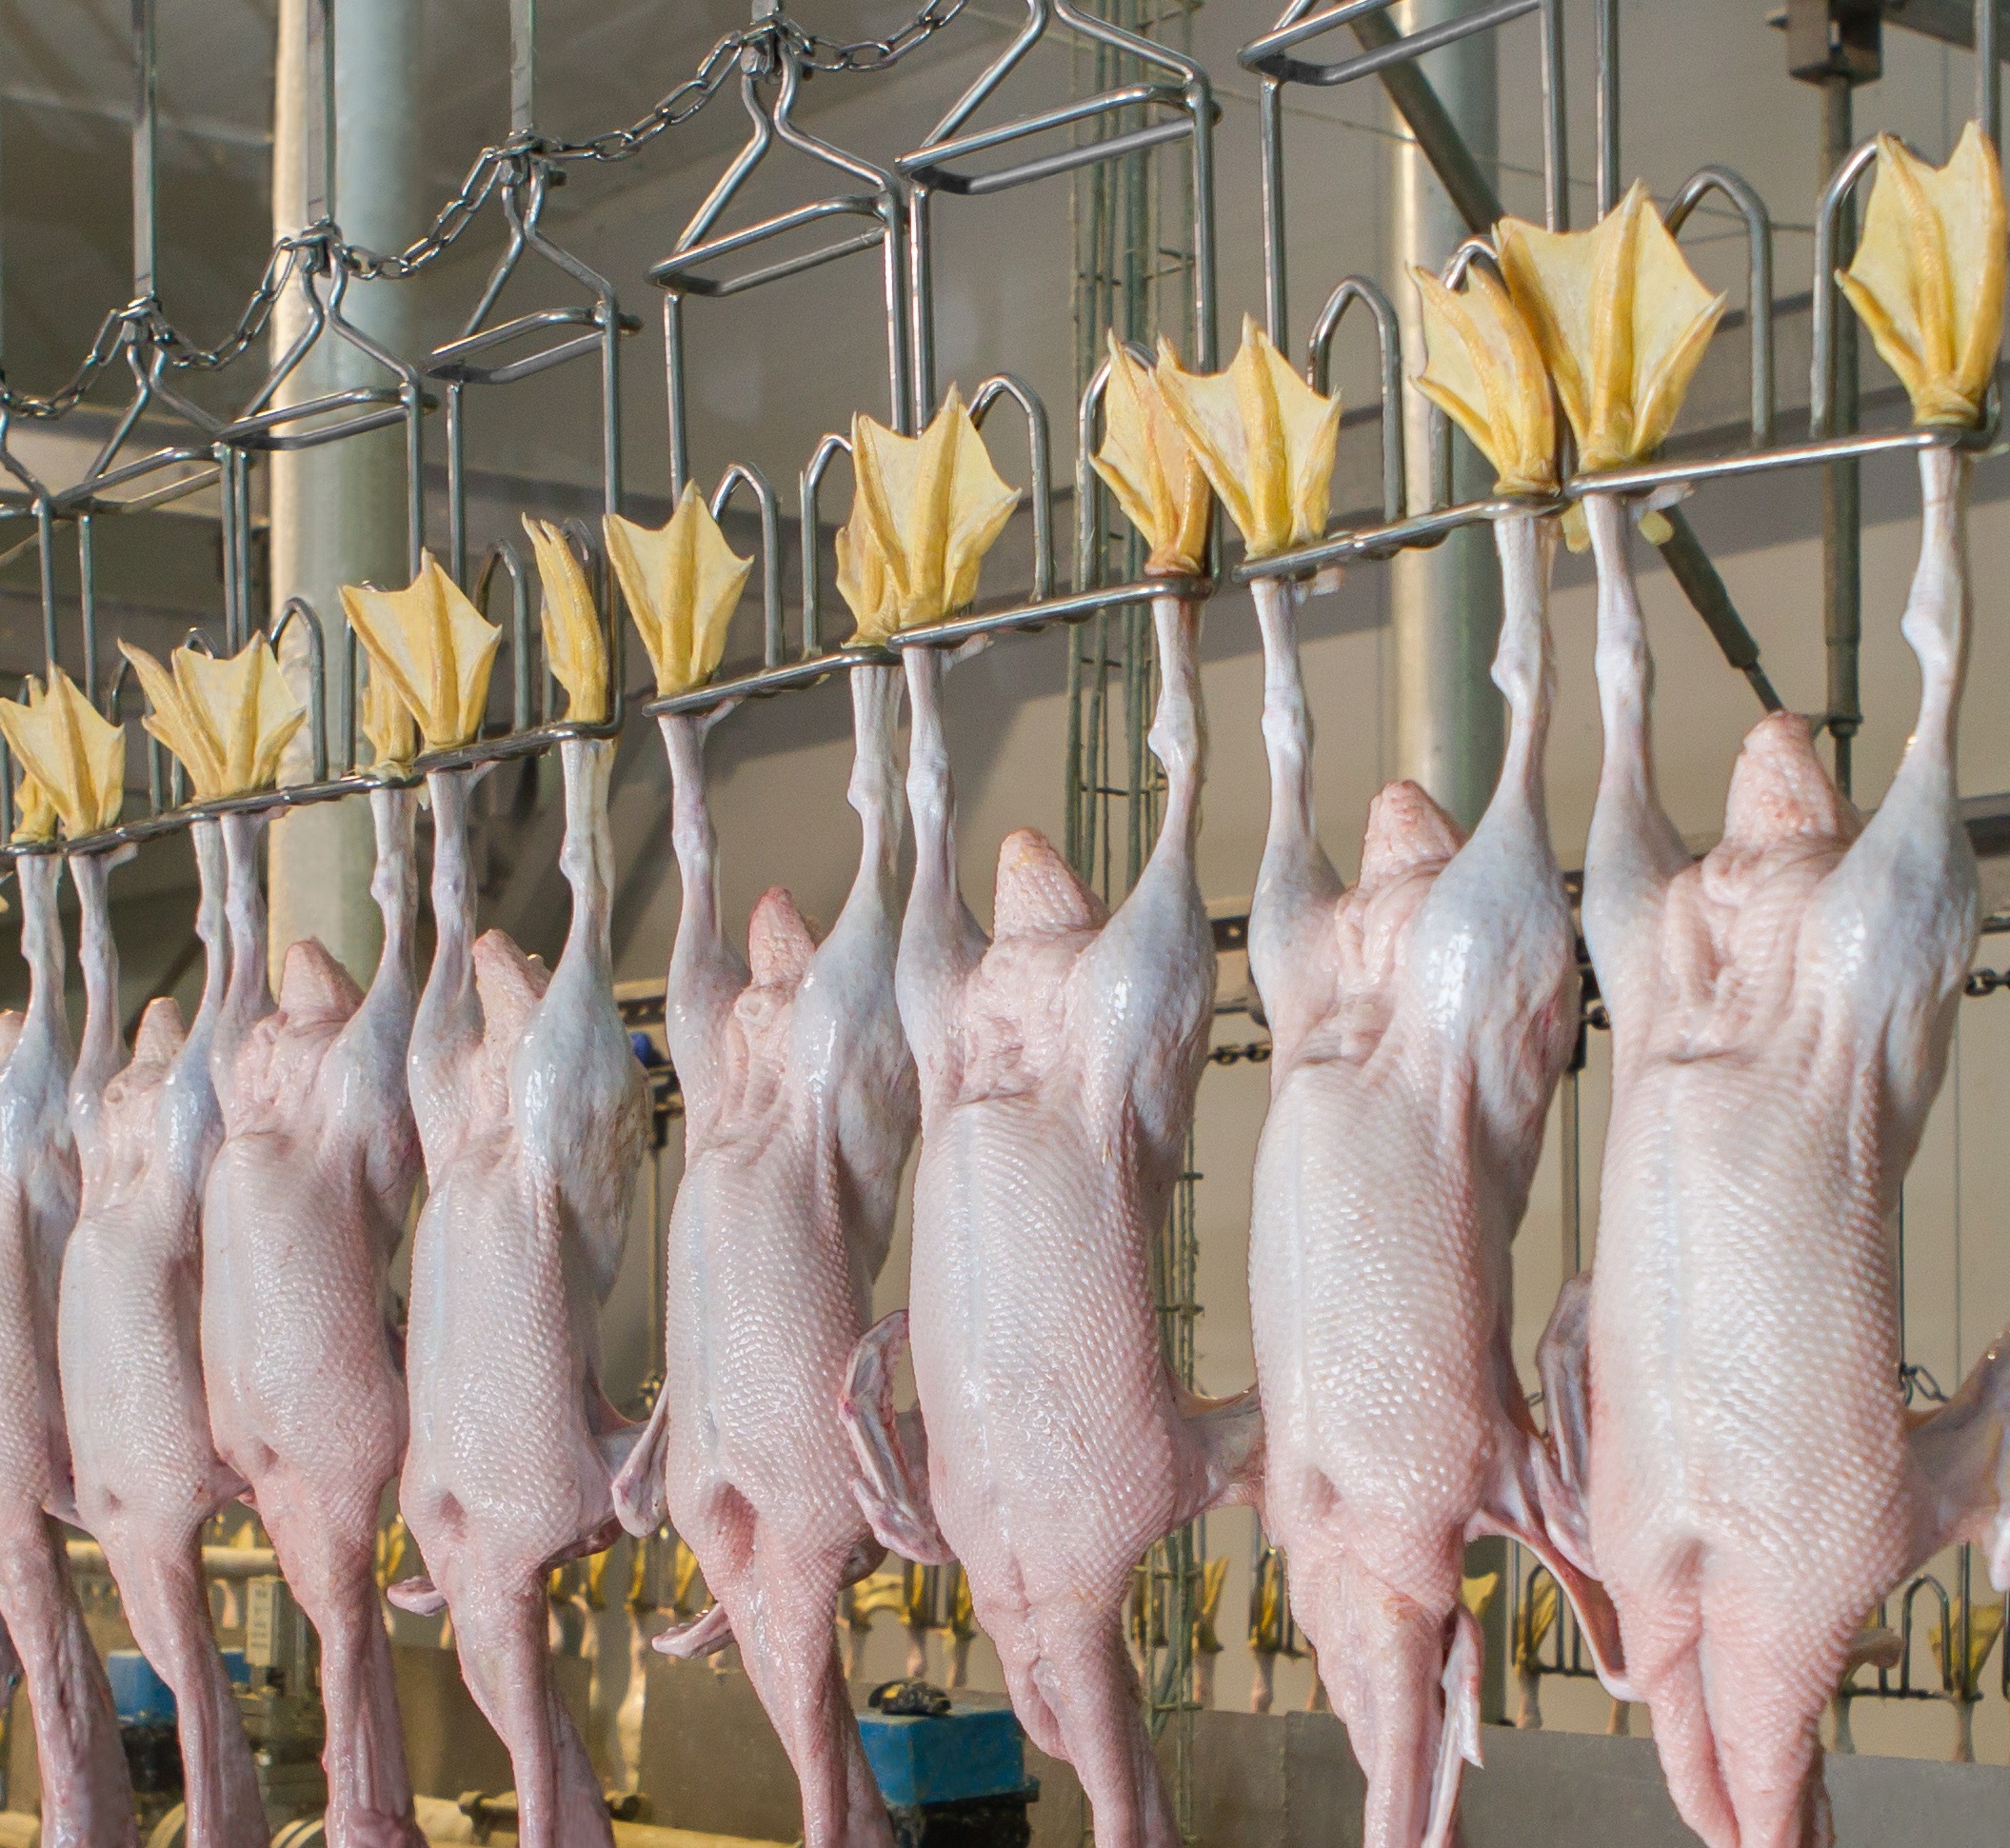 What are the hot topics in duck processing?